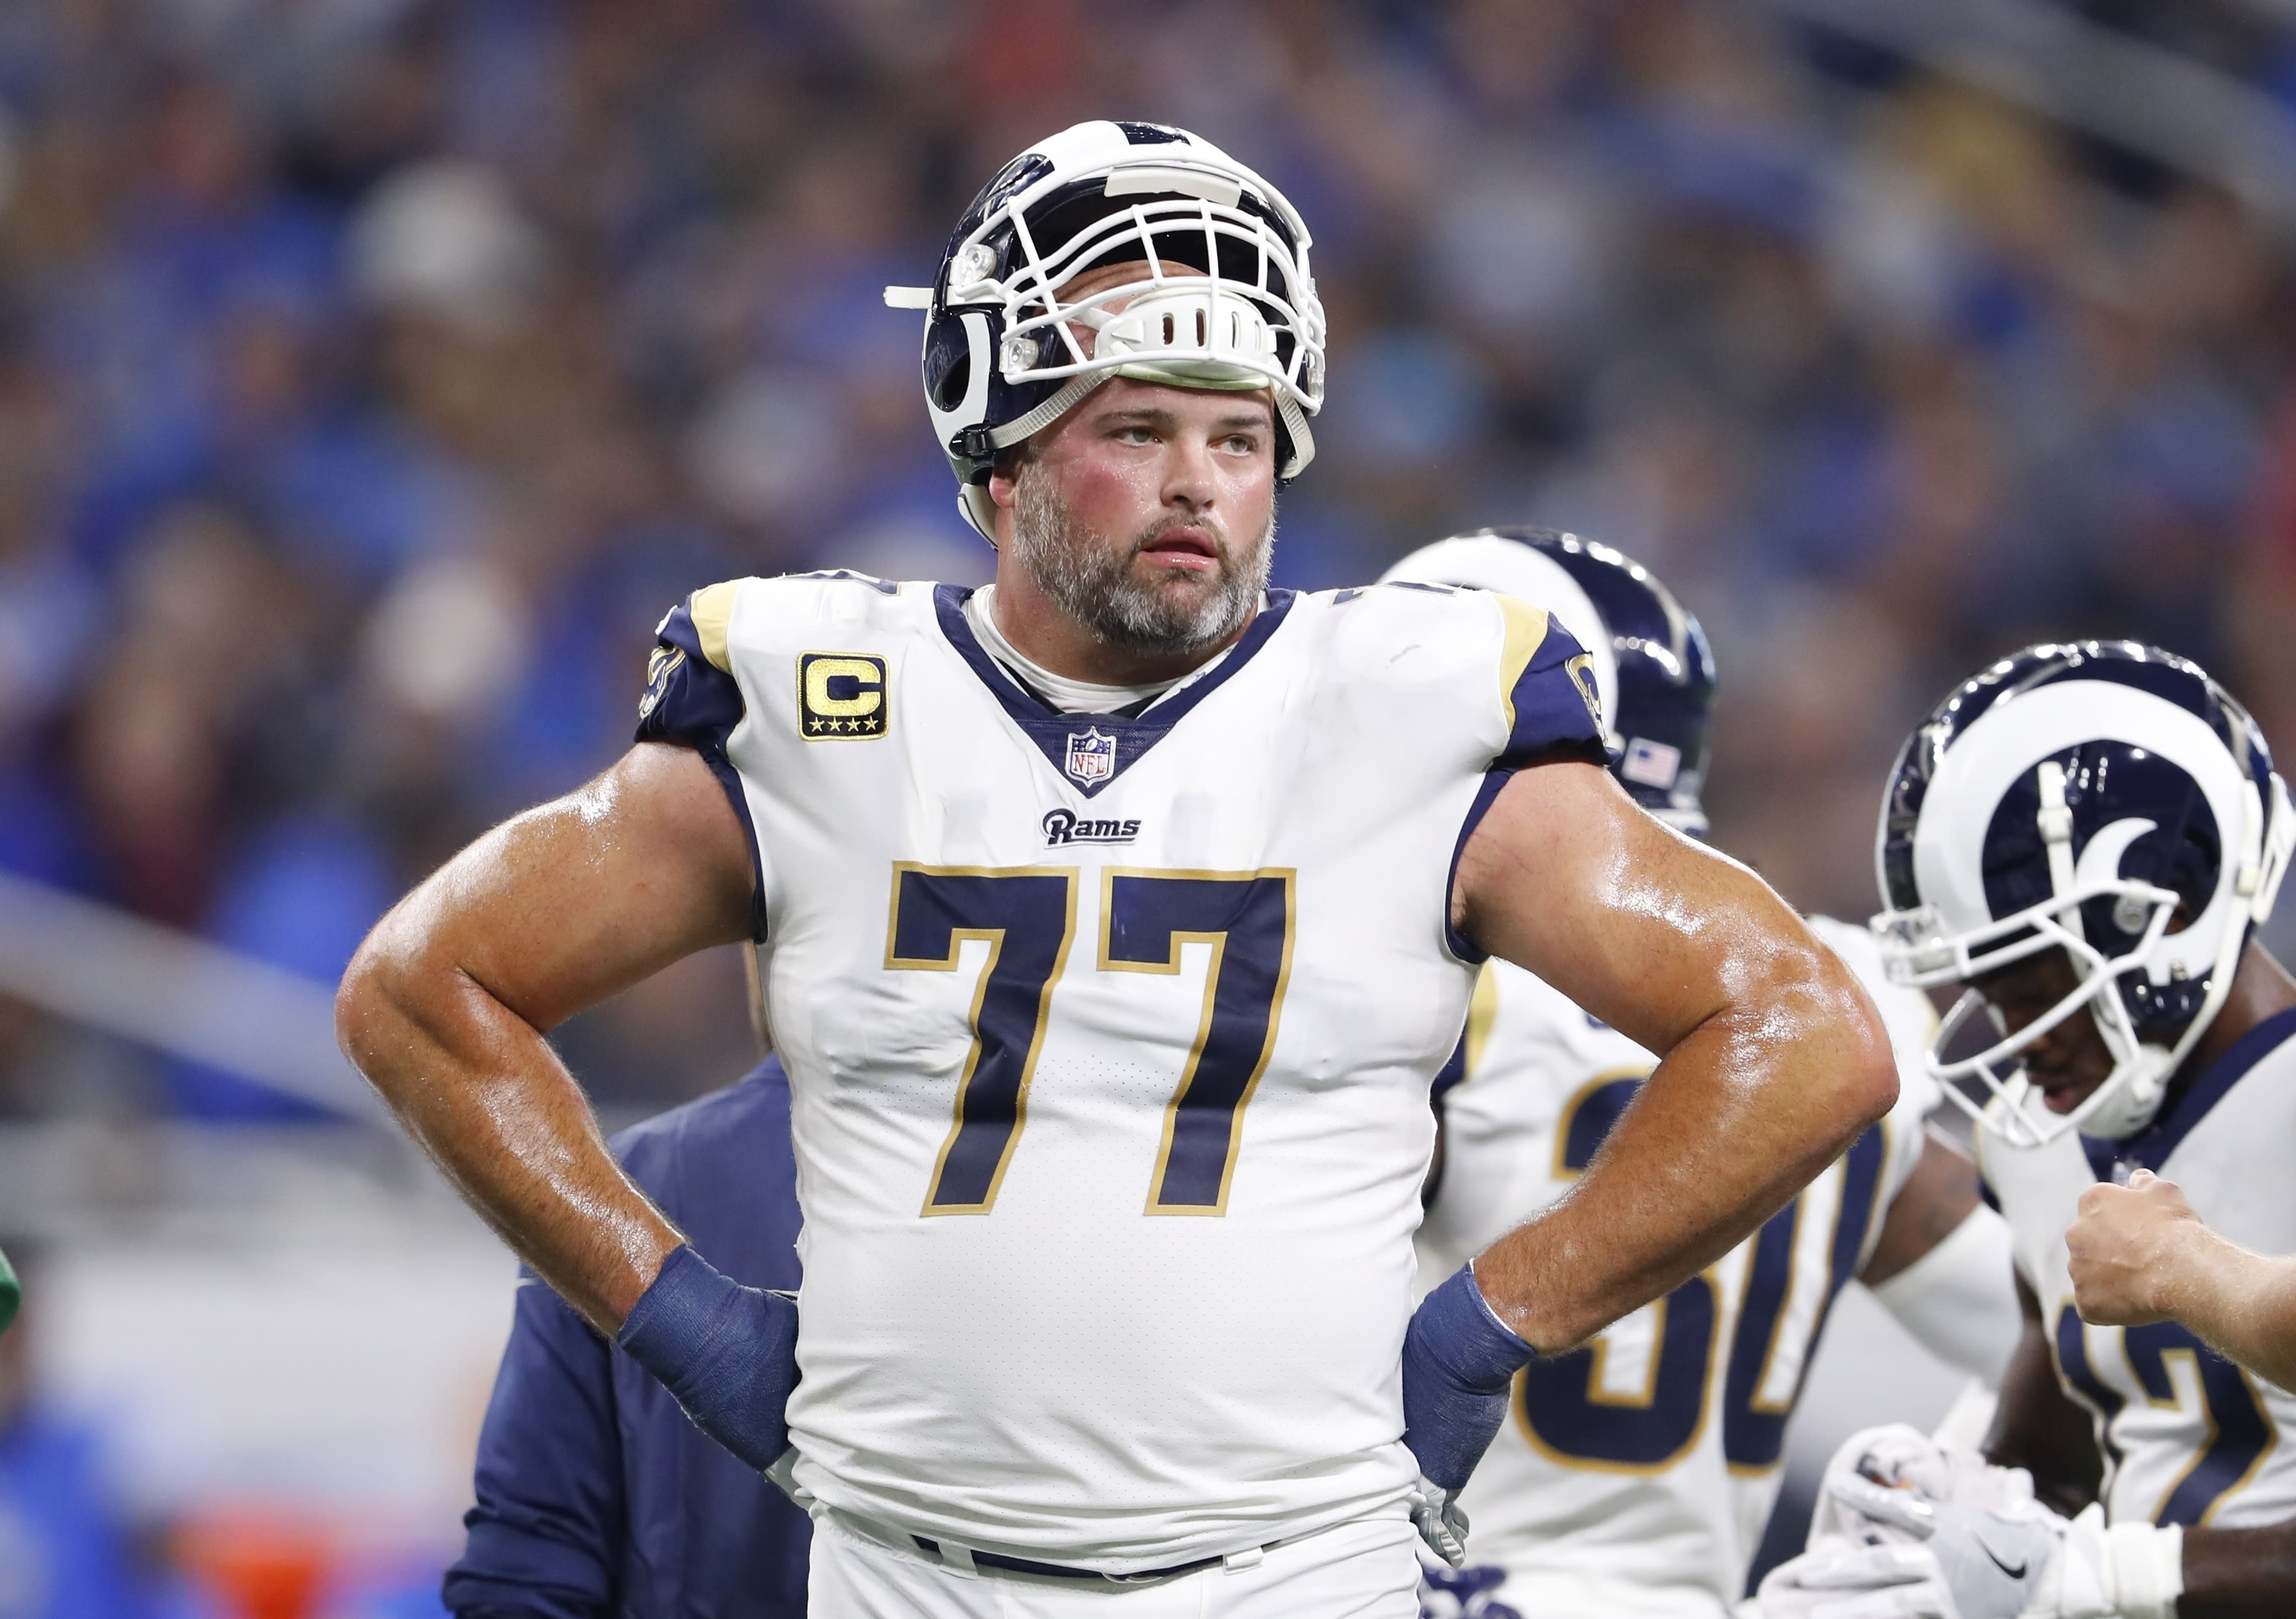 Andrew Whitworth beating the odds at age 37